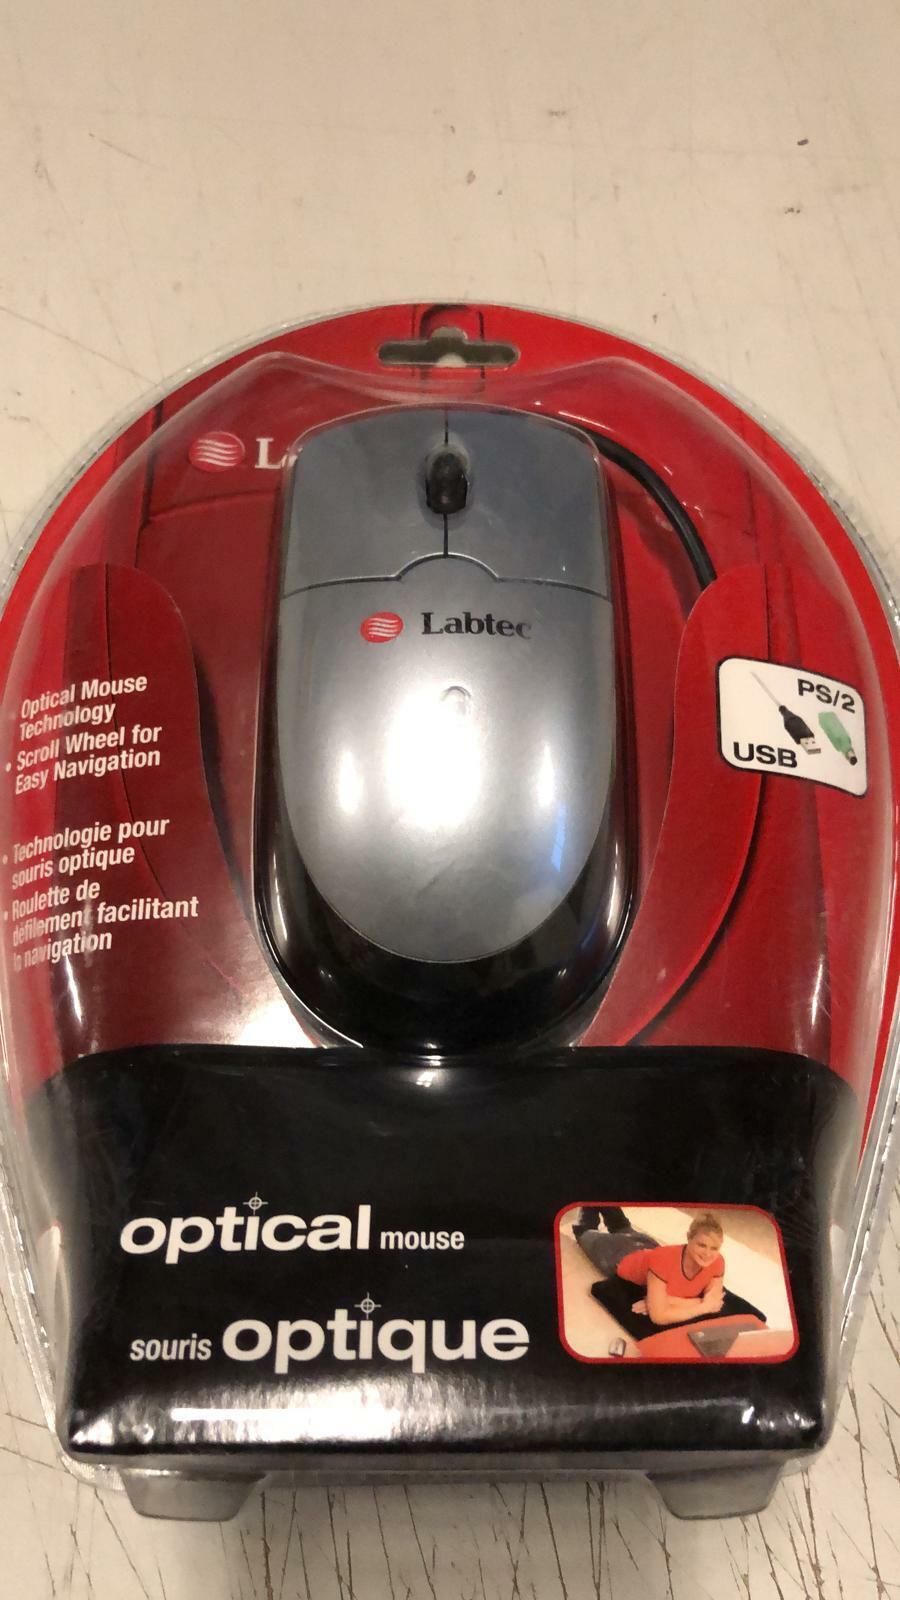 Brand New. Lot of 18  Labtec optical mouse 911530-0403. Available Now for $159.99